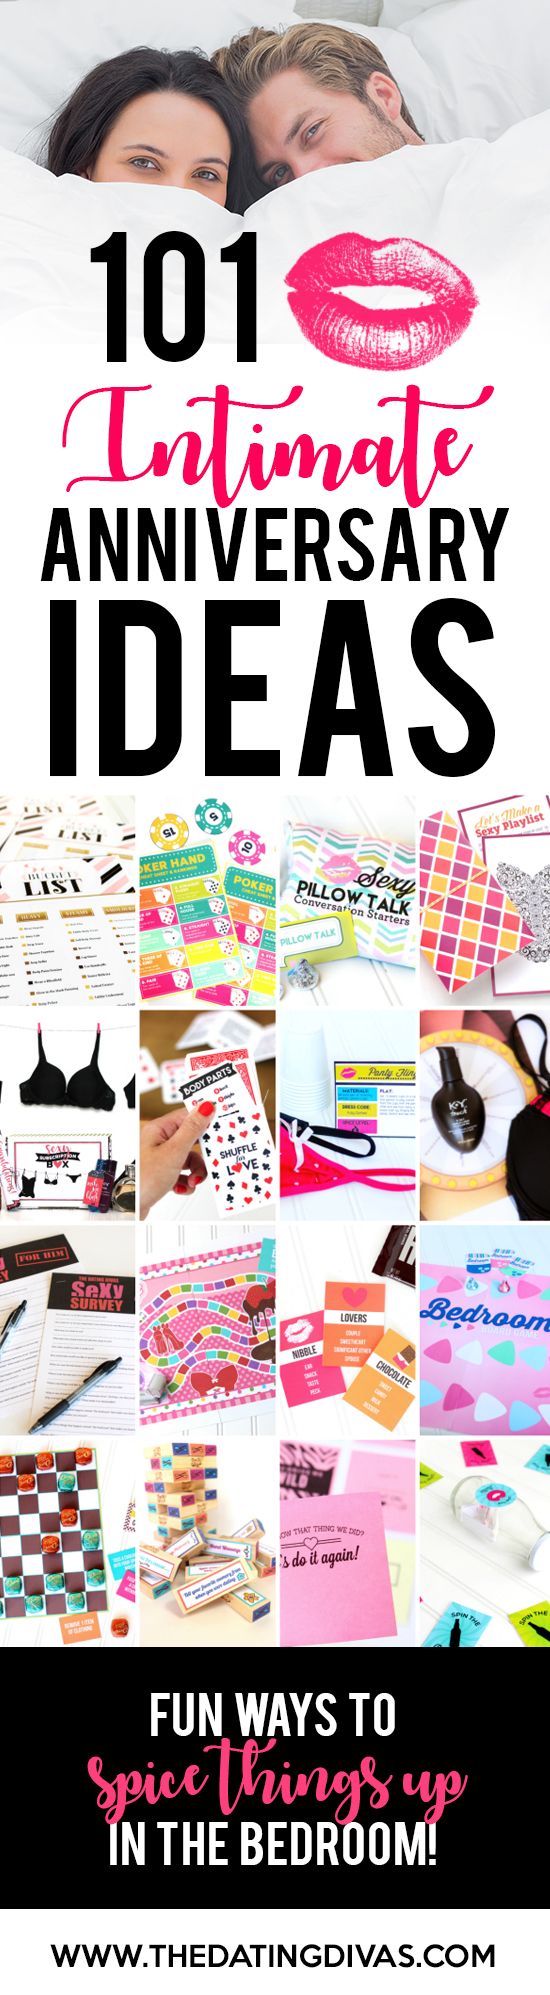 Diy Gifts Over 100 Sexy And Intimate Anniversary Ideas Everything From Dates To Games To My Gifts List Leading Gifts Inspiration Magazine Gift Ideas For Everyone Find The,Lovebirds Movie